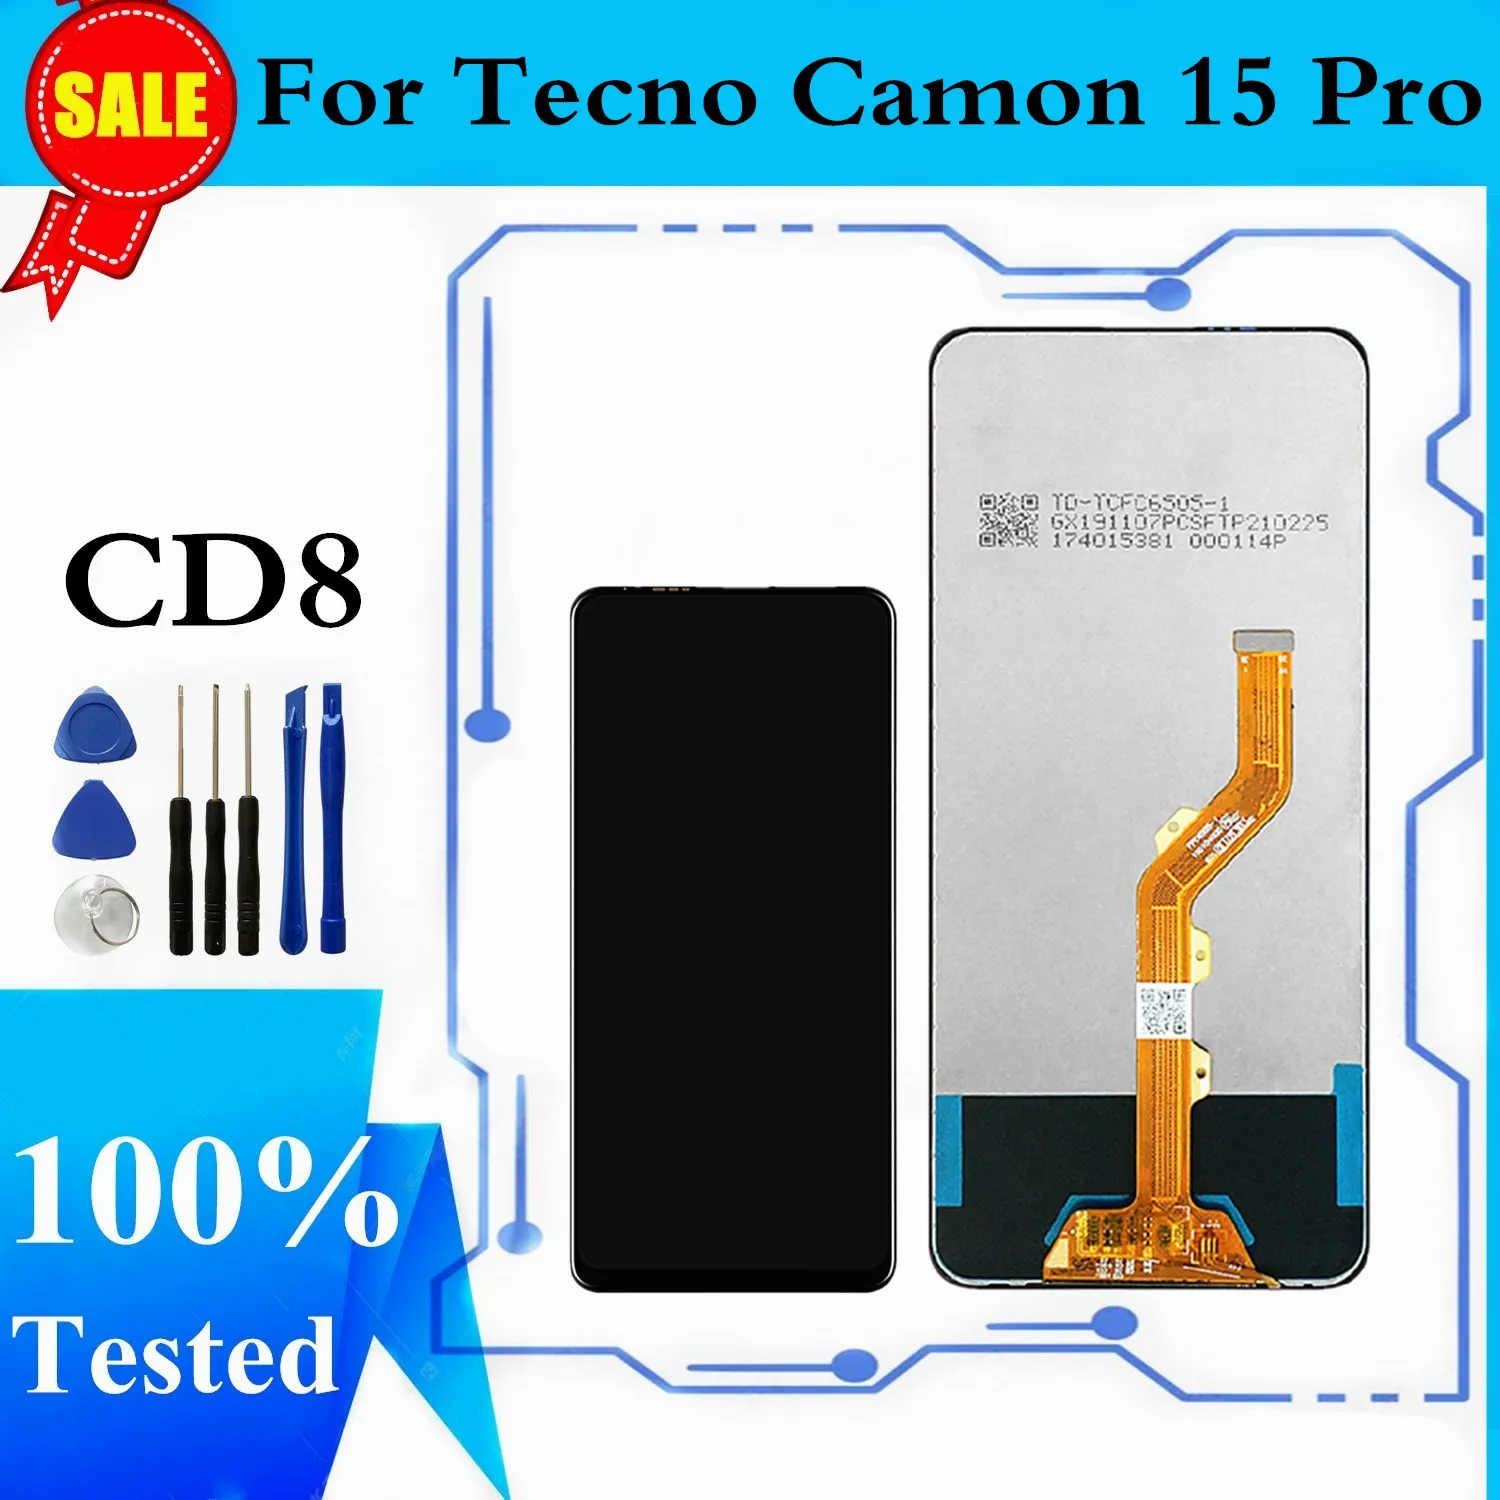 

For Tecno Camon 15 Pro CD8 LCD Display Touch Screen Digitizer Assembly Camon 15 Premier CD8J Replacement Parts